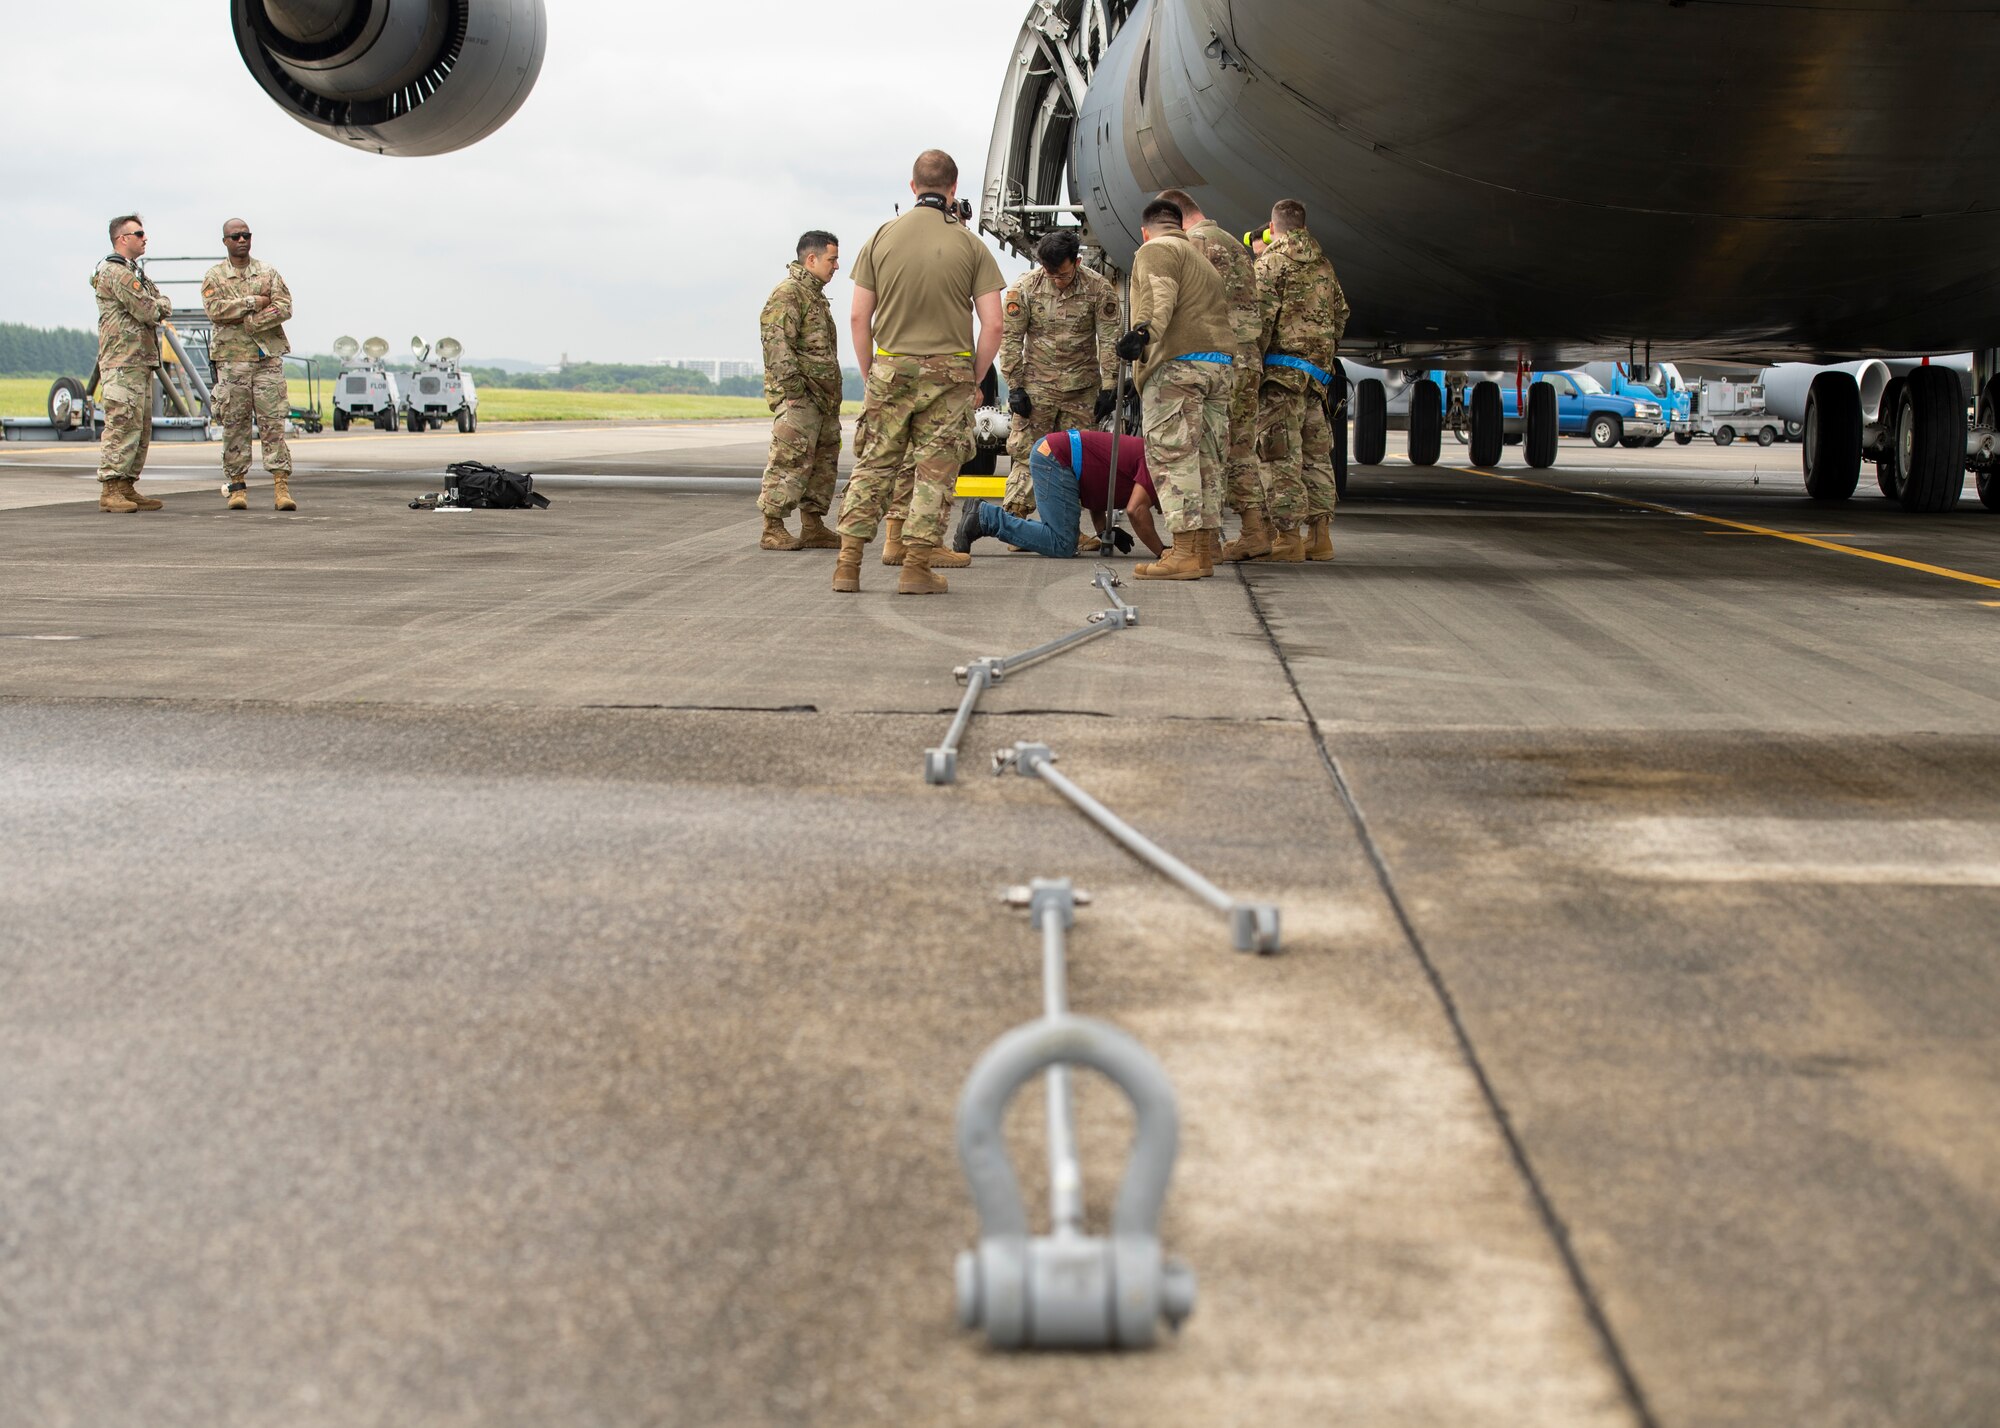 A wide view of eight airmen attaching metal bars together